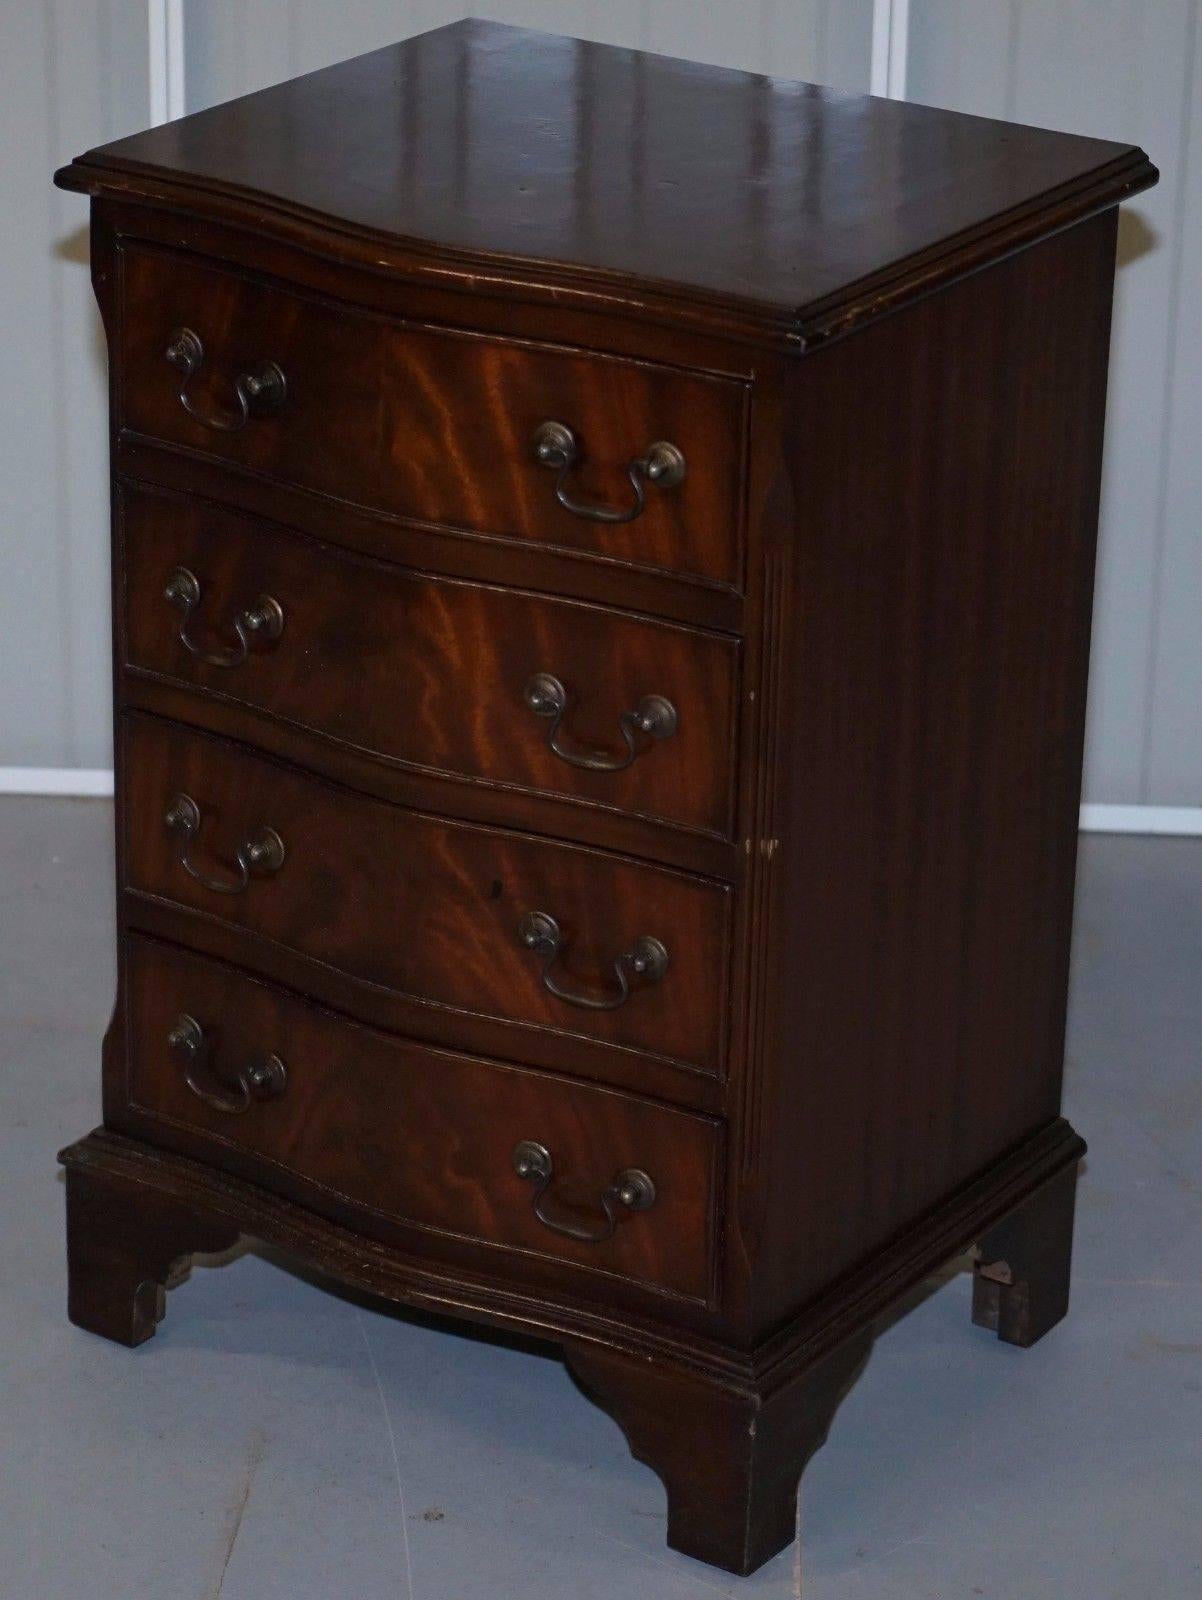 British Lovely Sized Flamed Hardwood Side Table Bank / Chest of Drawers Campaign Style